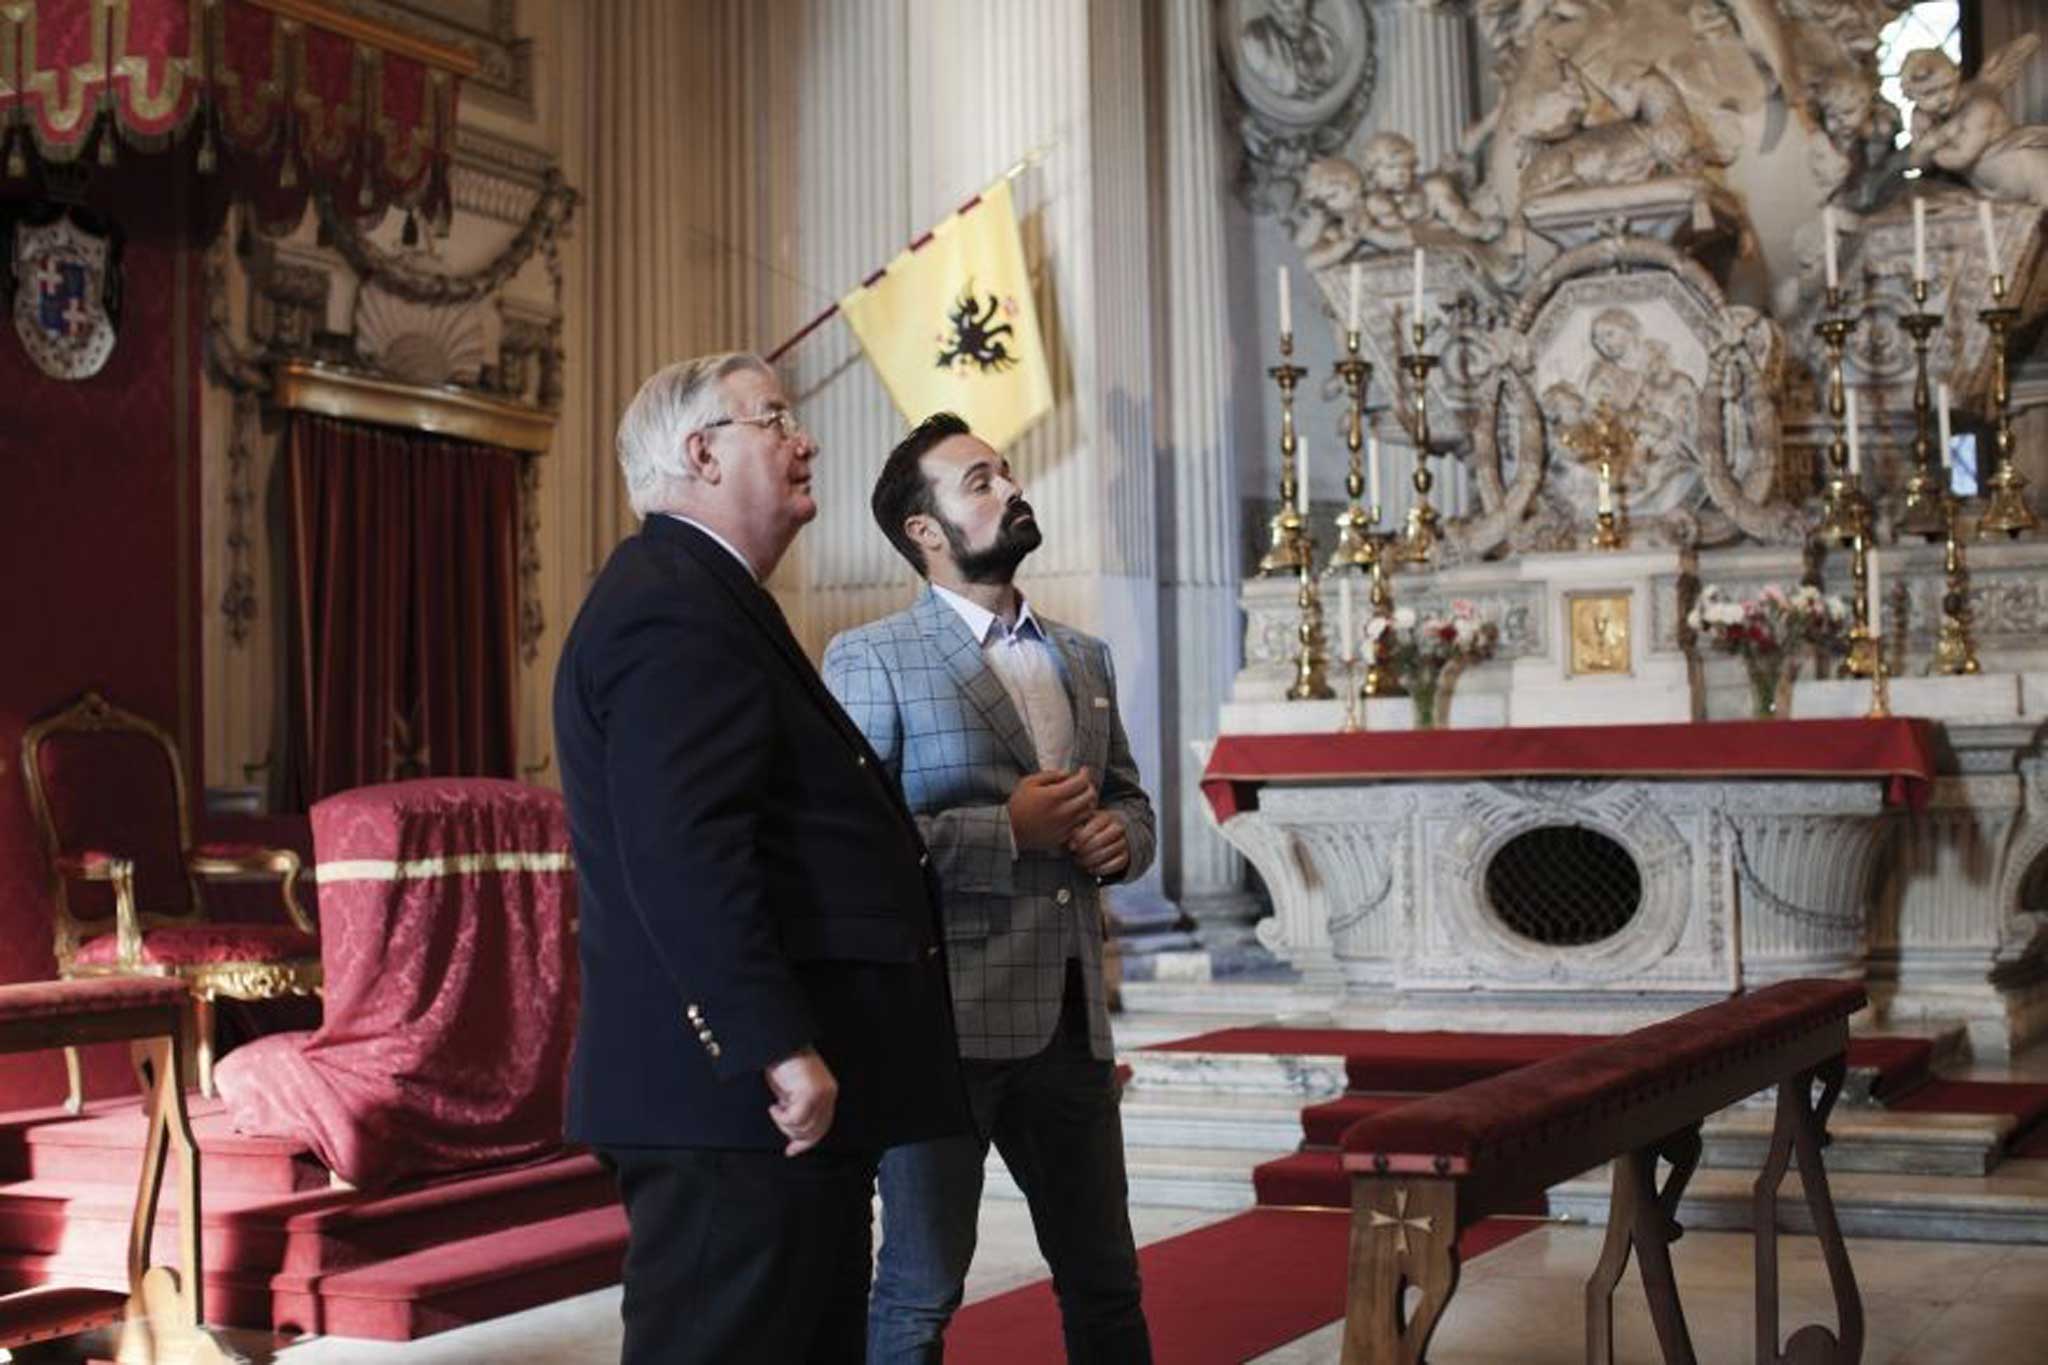 Independent territory: Grand Master Festing shows Evgeny Lebedev around the Order's Piranesi chapel